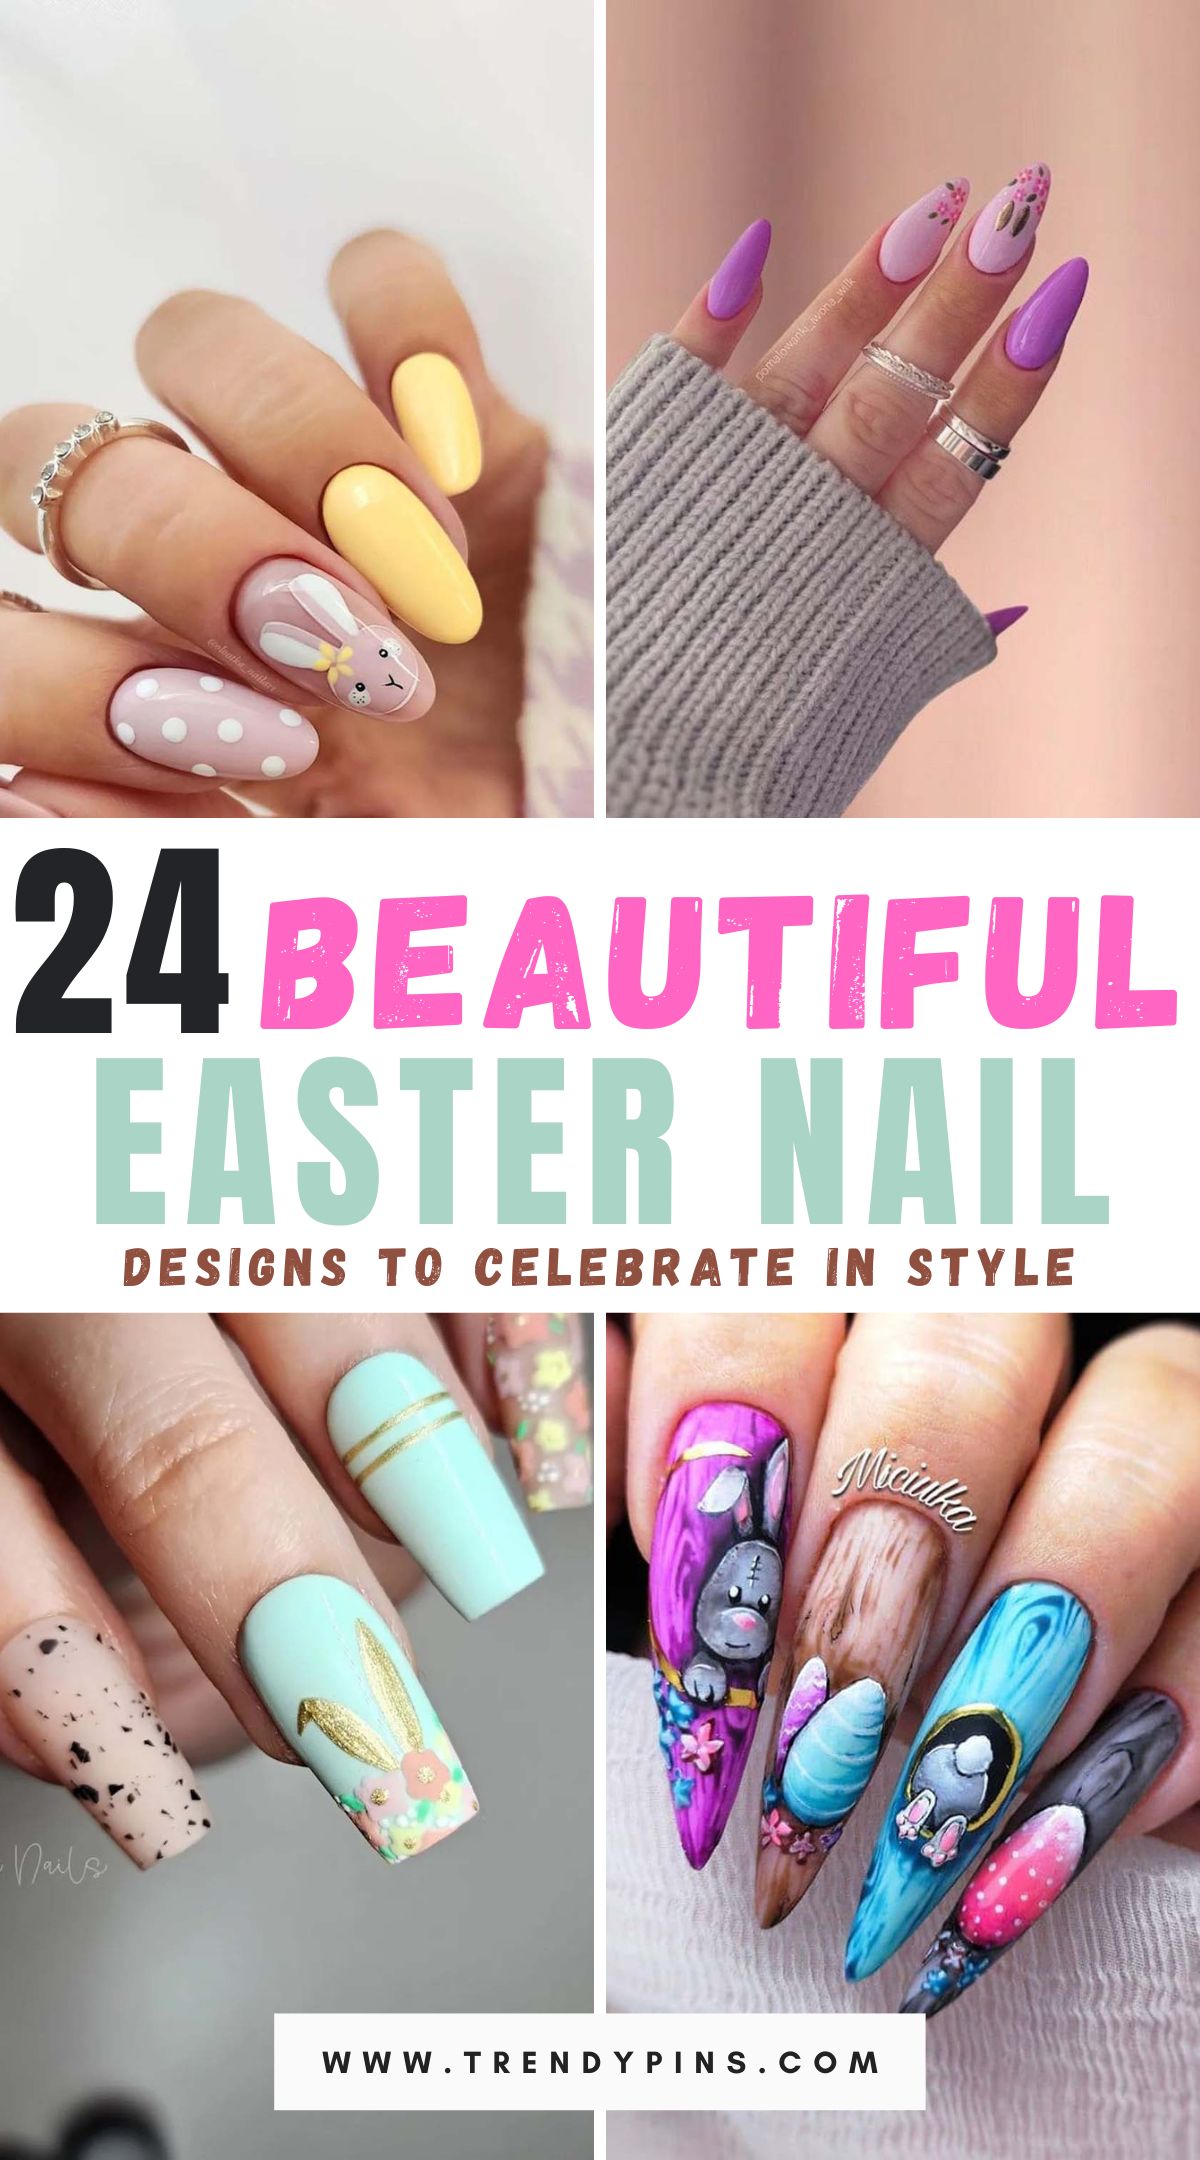 Discover 24 captivating Easter nail designs that will elevate your holiday mood with vibrant colors and playful patterns. Perfect for any Easter celebration!